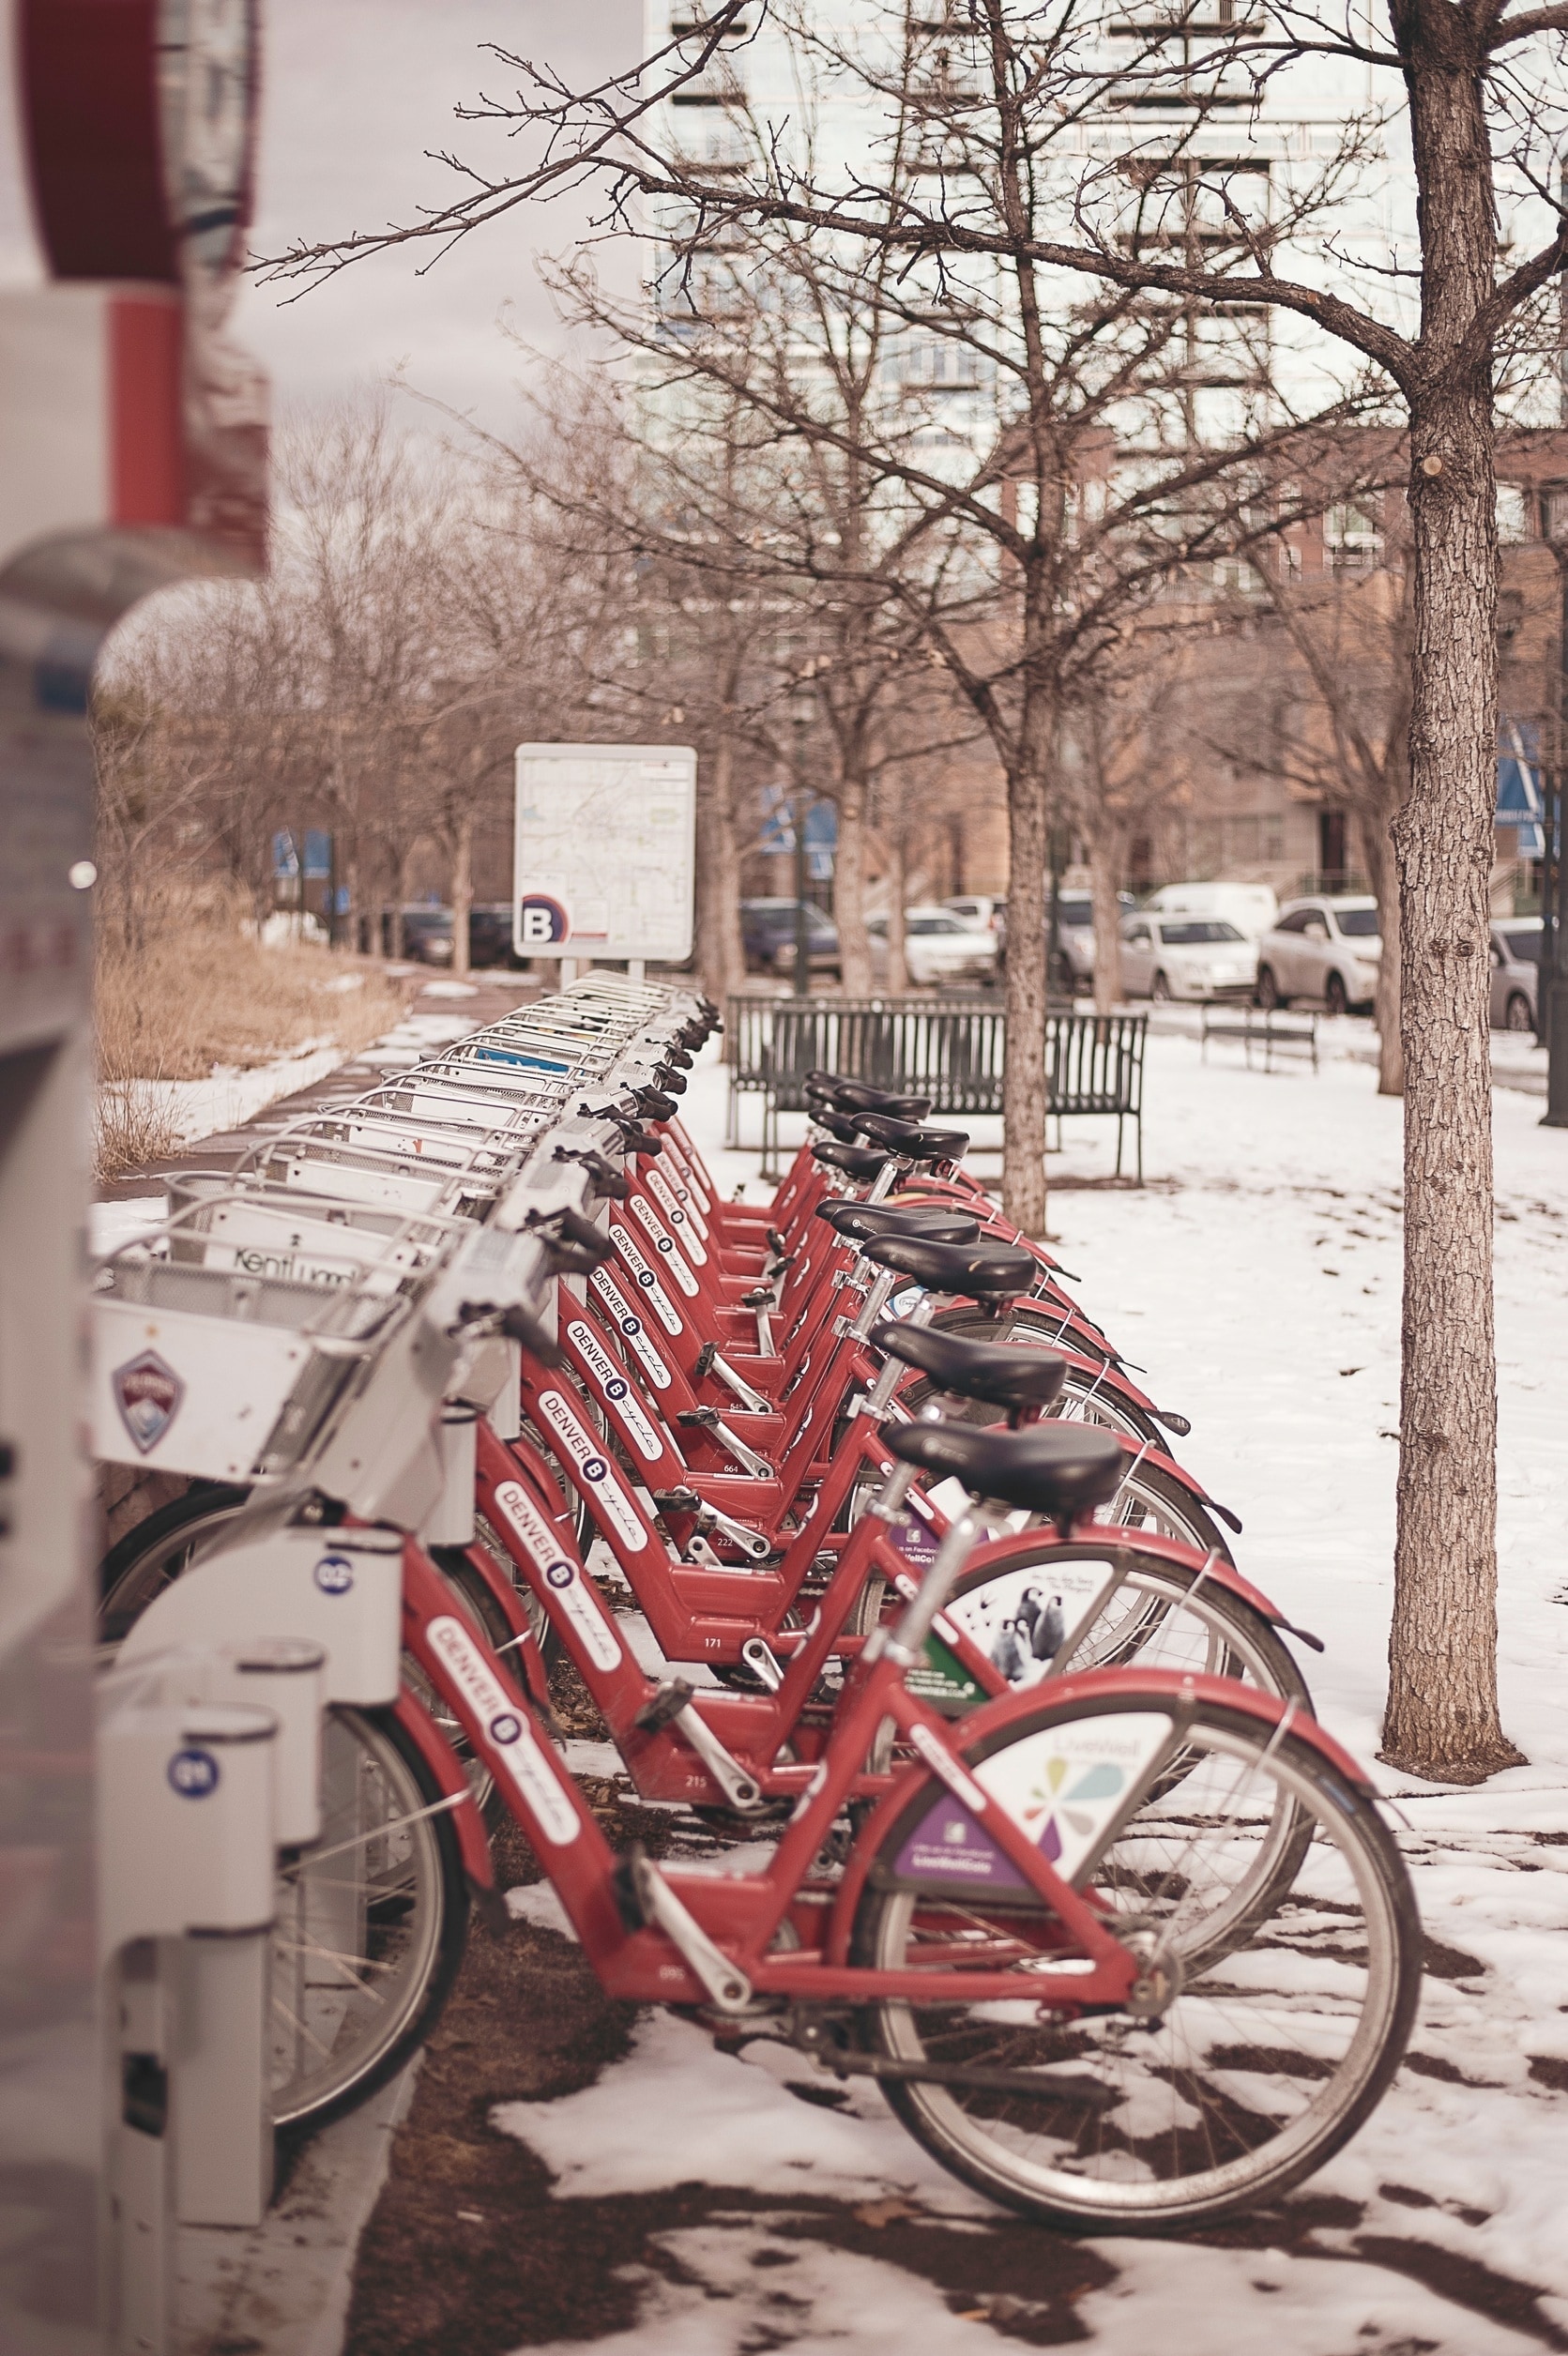 Bikes, Winter, City, Denver, Bicycles, no people, outdoors